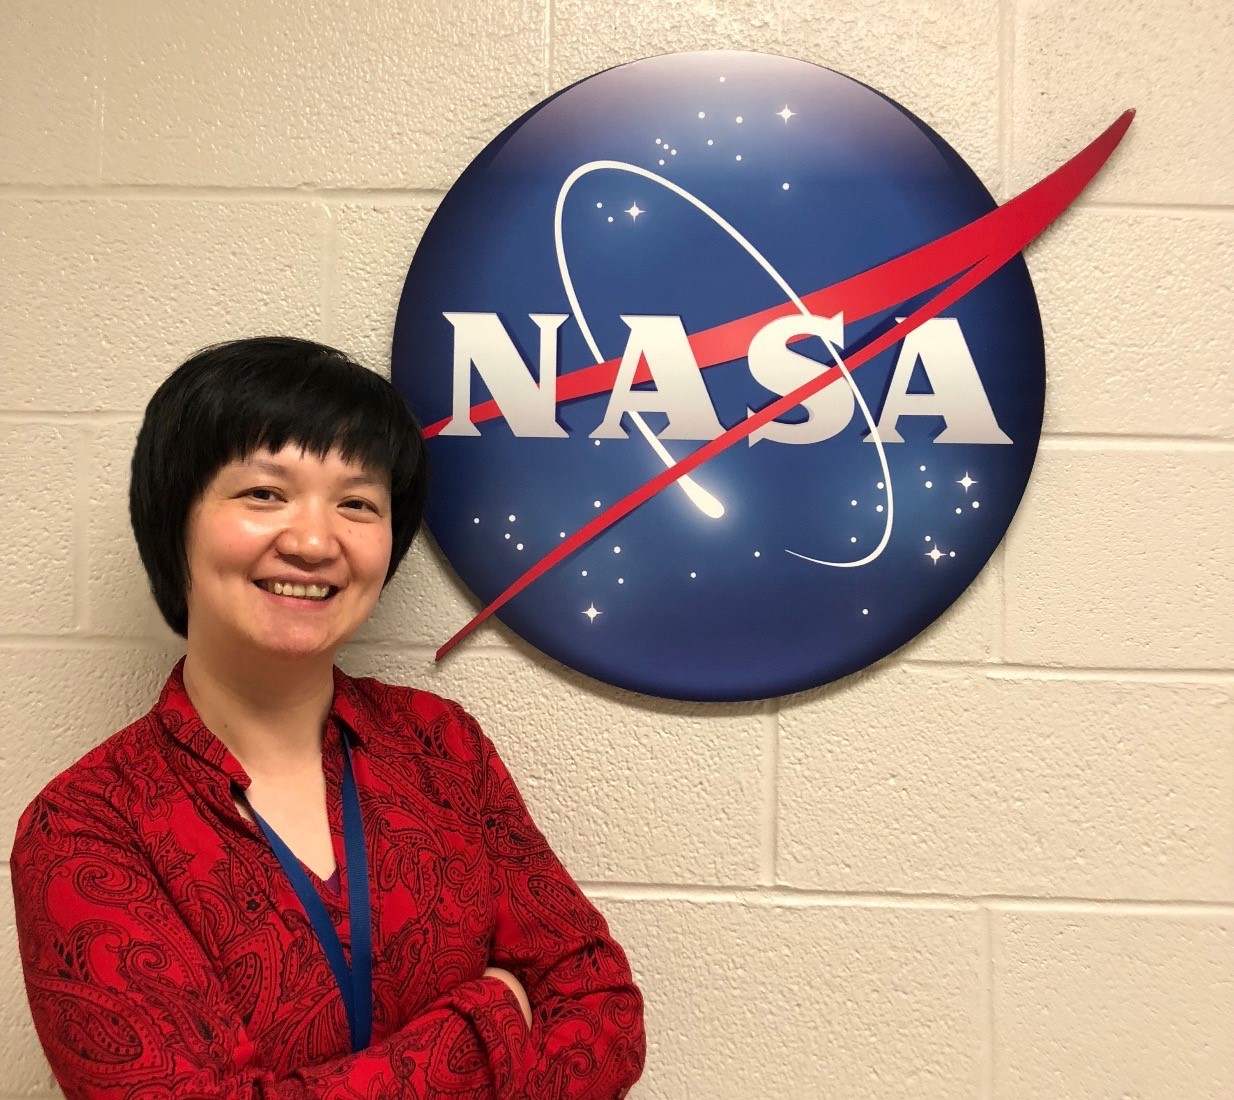 Woman with short, black hair, wearing a red shirt and a blue lanyard smiles in front of a wall with a large NASA meatball